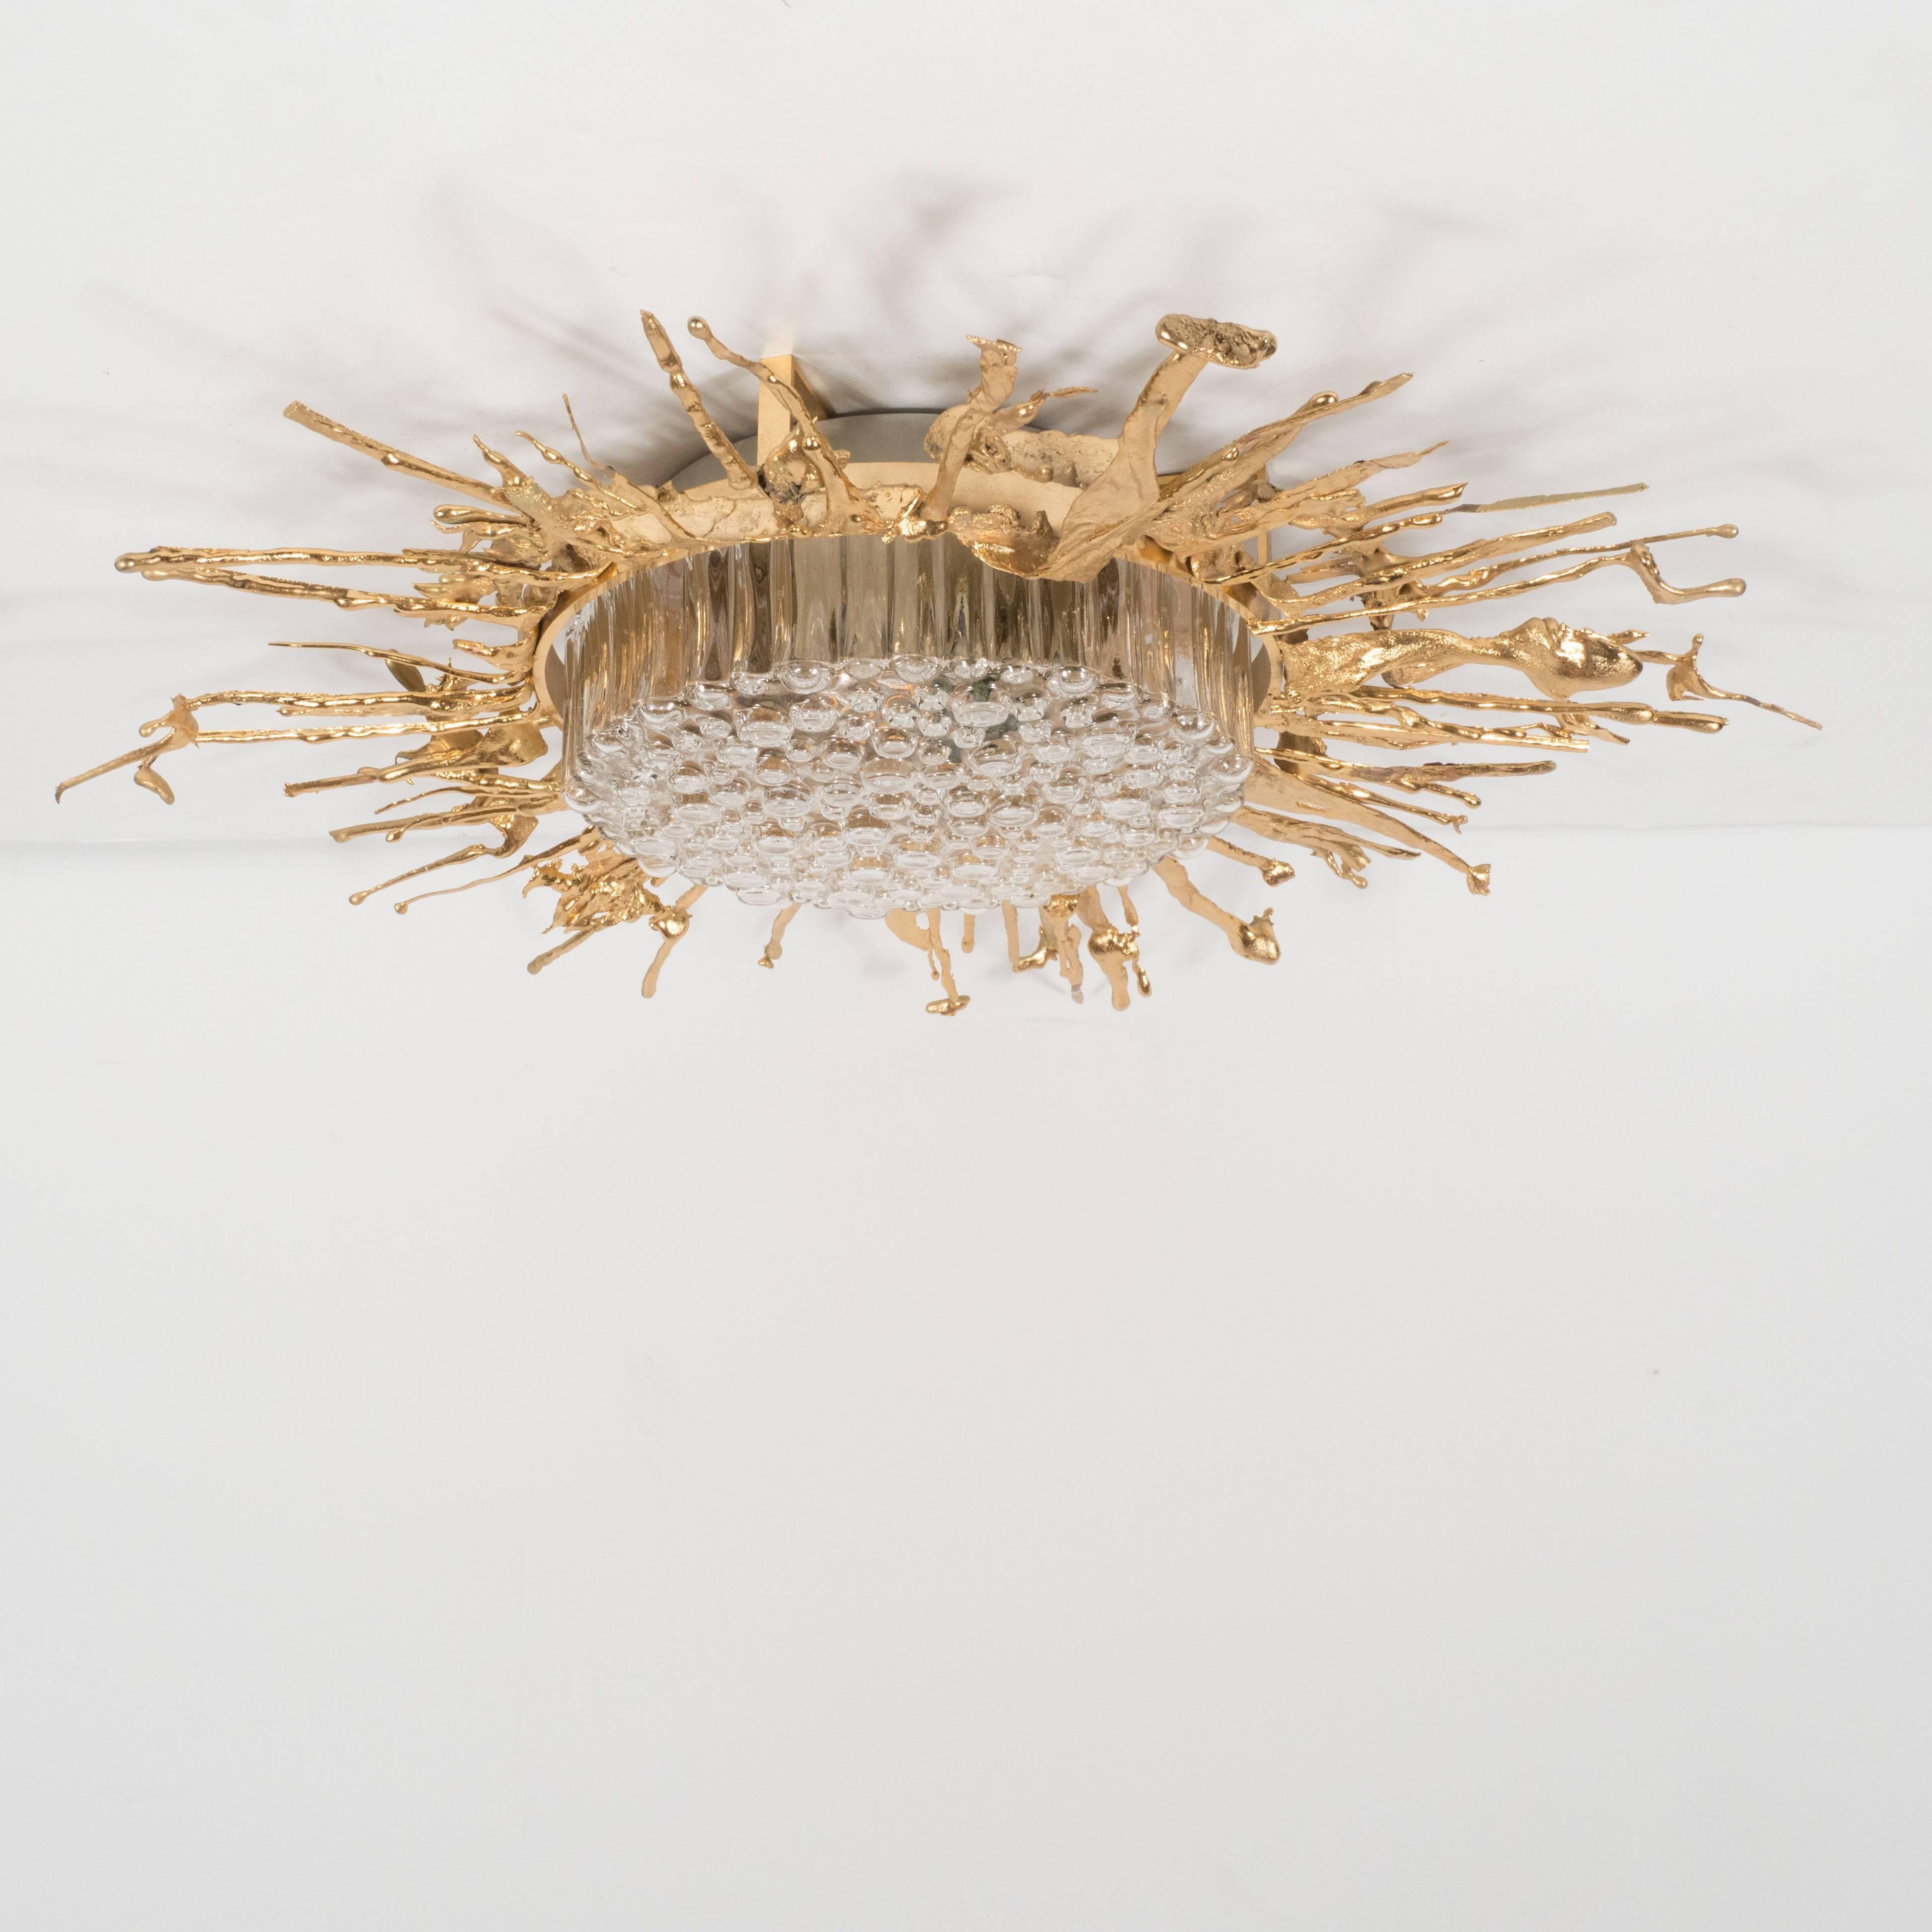 This stunning flush mount chandelier, handmade by the renowned French designer Claude-Victor Boeltz, features an explosion of organic forms rendered in gilded bronze and a smoked gray glass cover with an abundance of suspended bubbles. The fixture